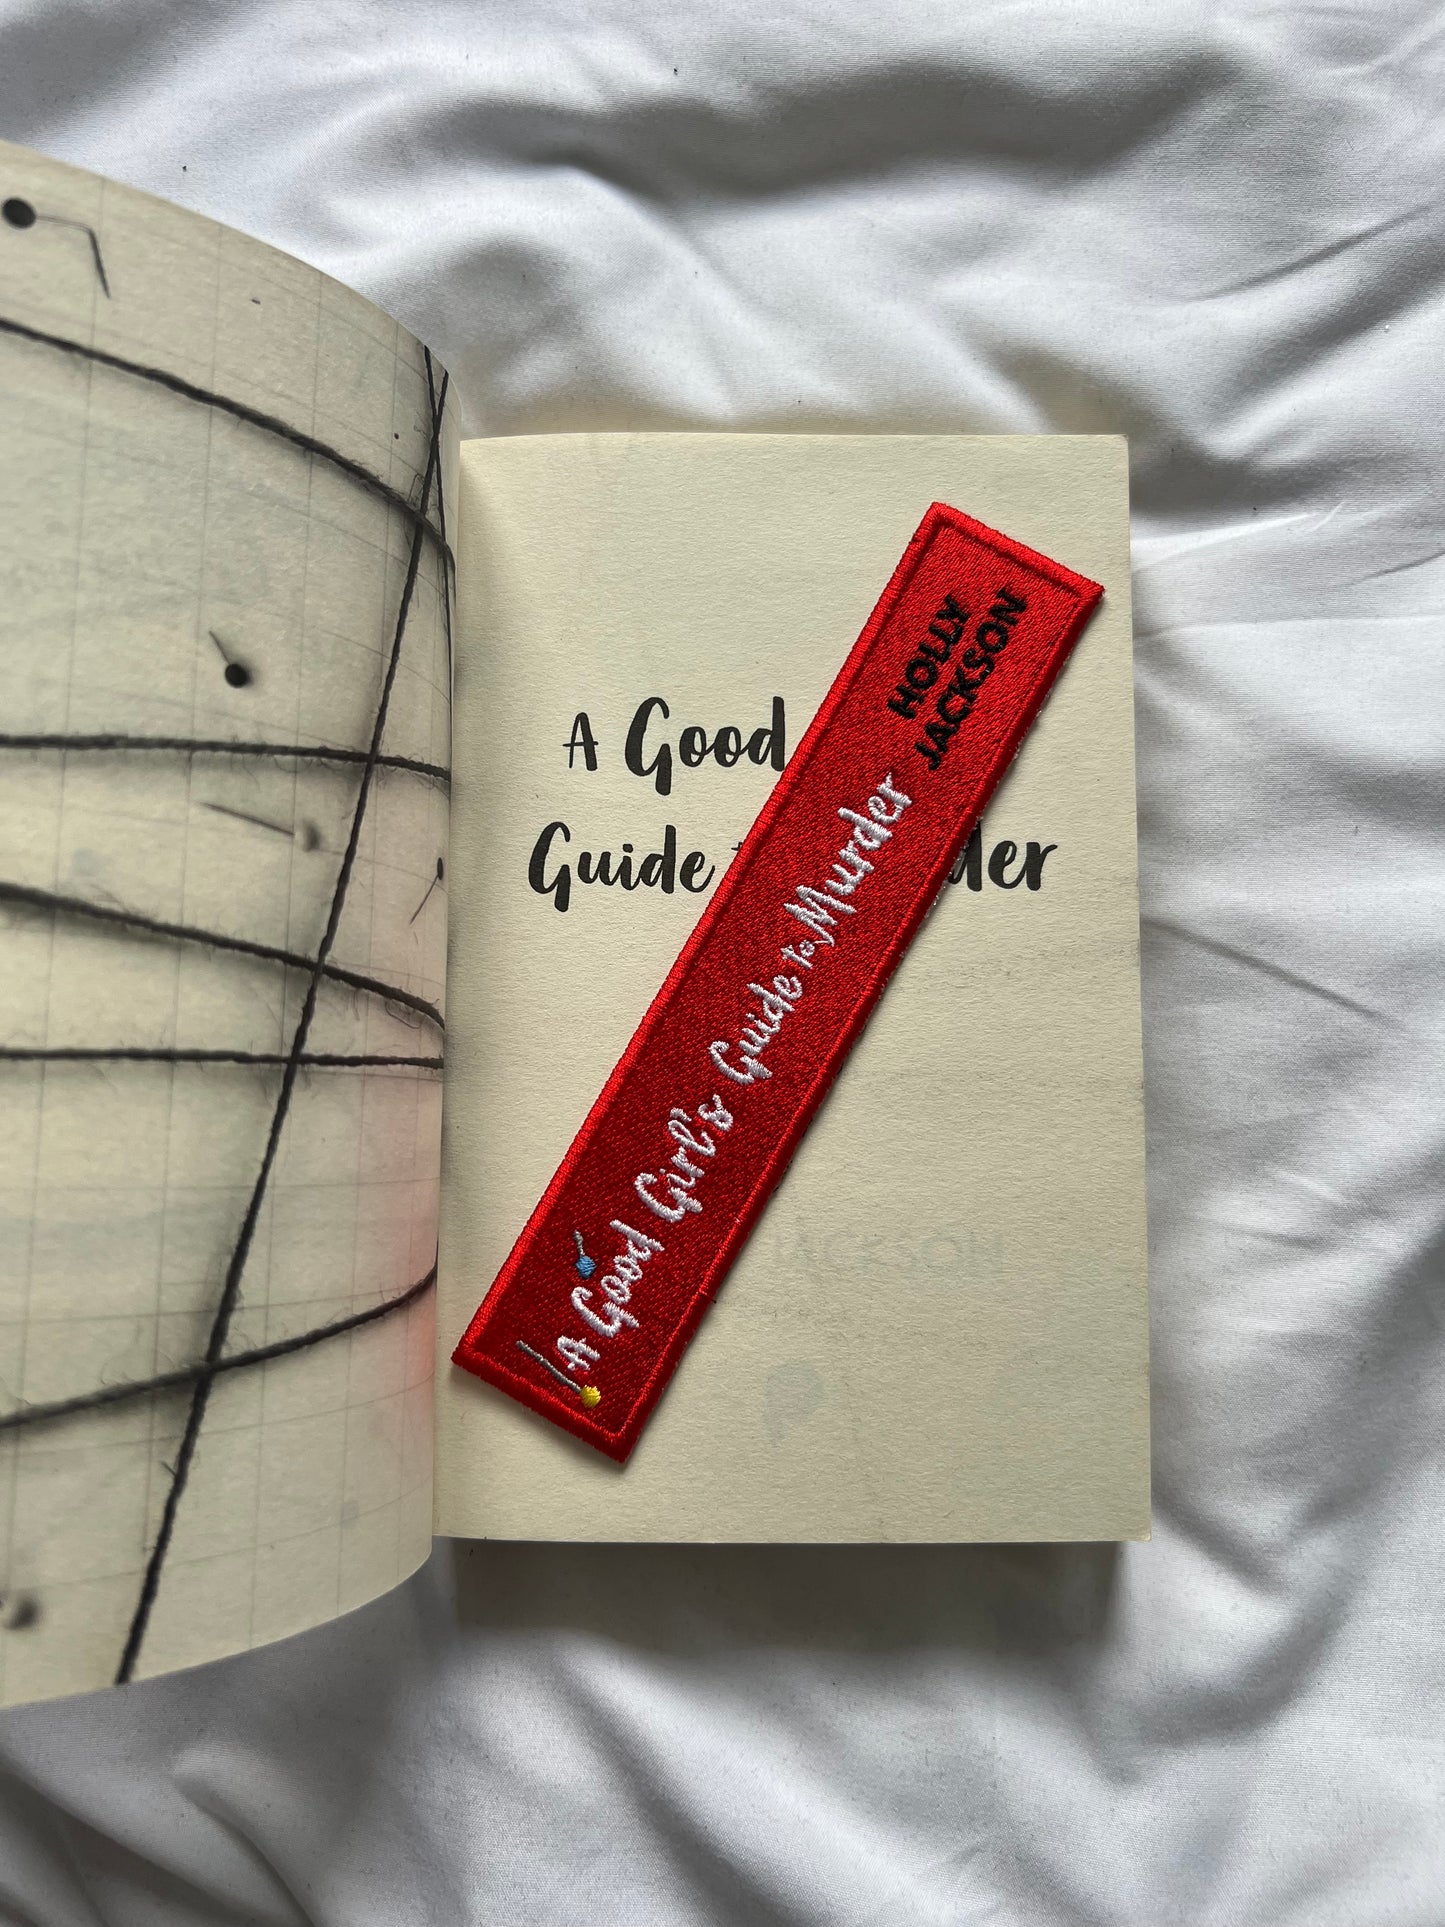 A Good Girls Guide To Murder Embroidered bookmark